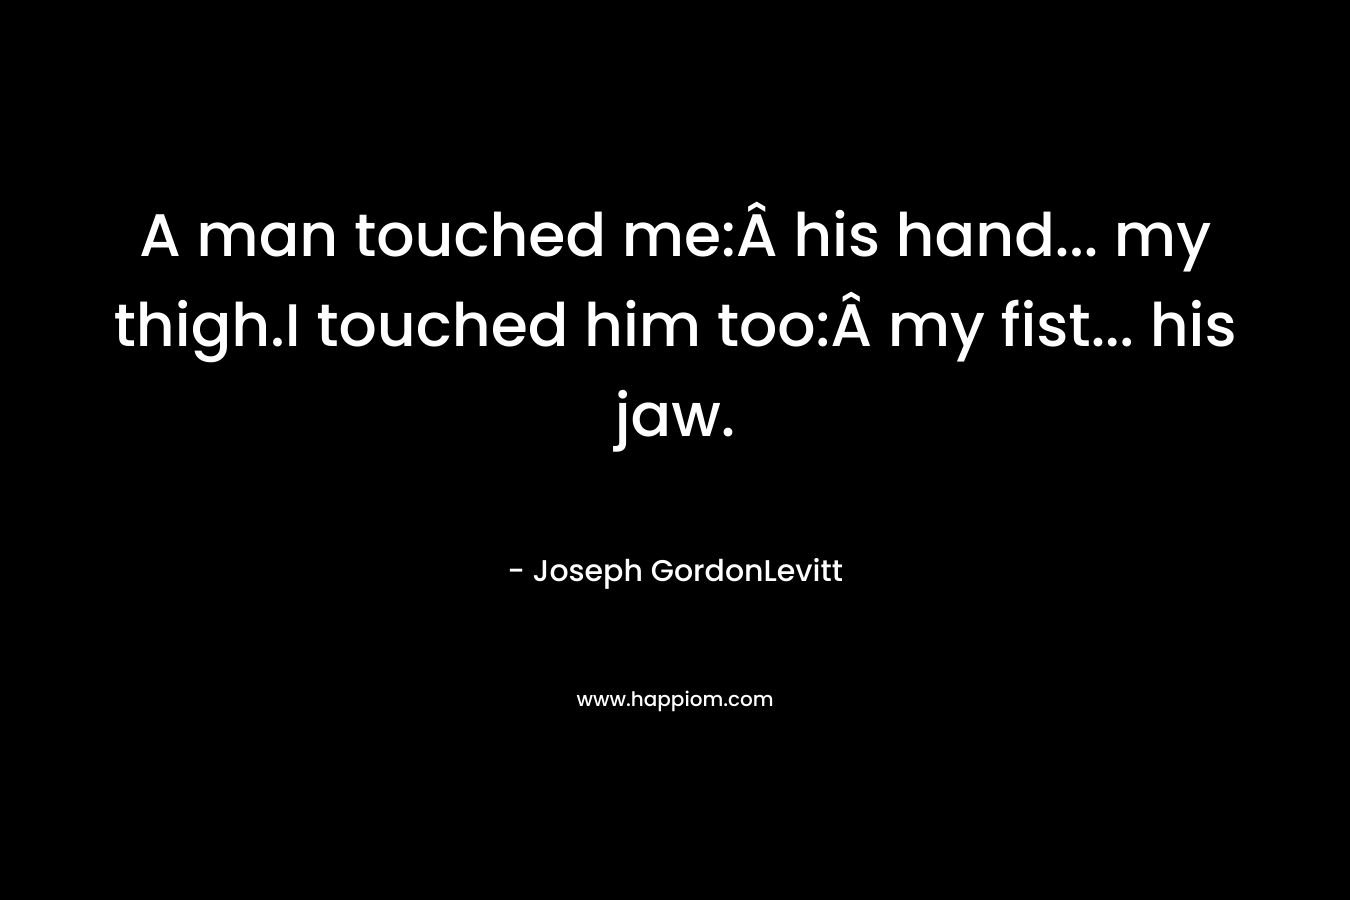 A man touched me:Â his hand... my thigh.I touched him too:Â my fist... his jaw.